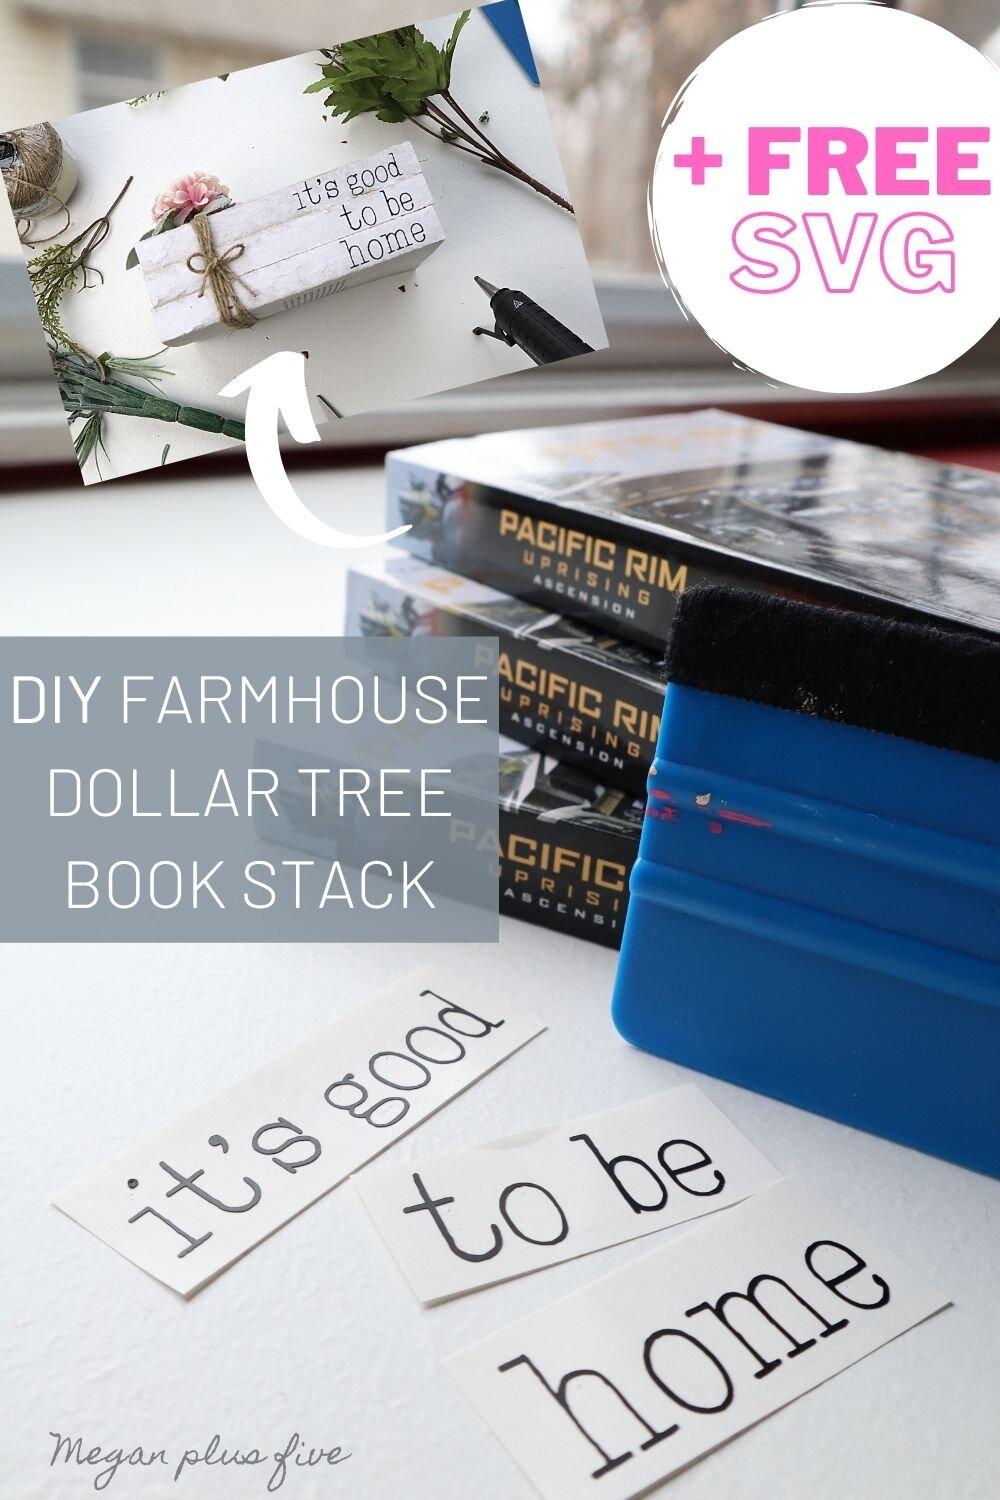 DIY farmhouse book stack using real book and vinyl decals from your Cricut cutting machine. Make your own simple rustic book stack easy & simple from Dollar Tree books.